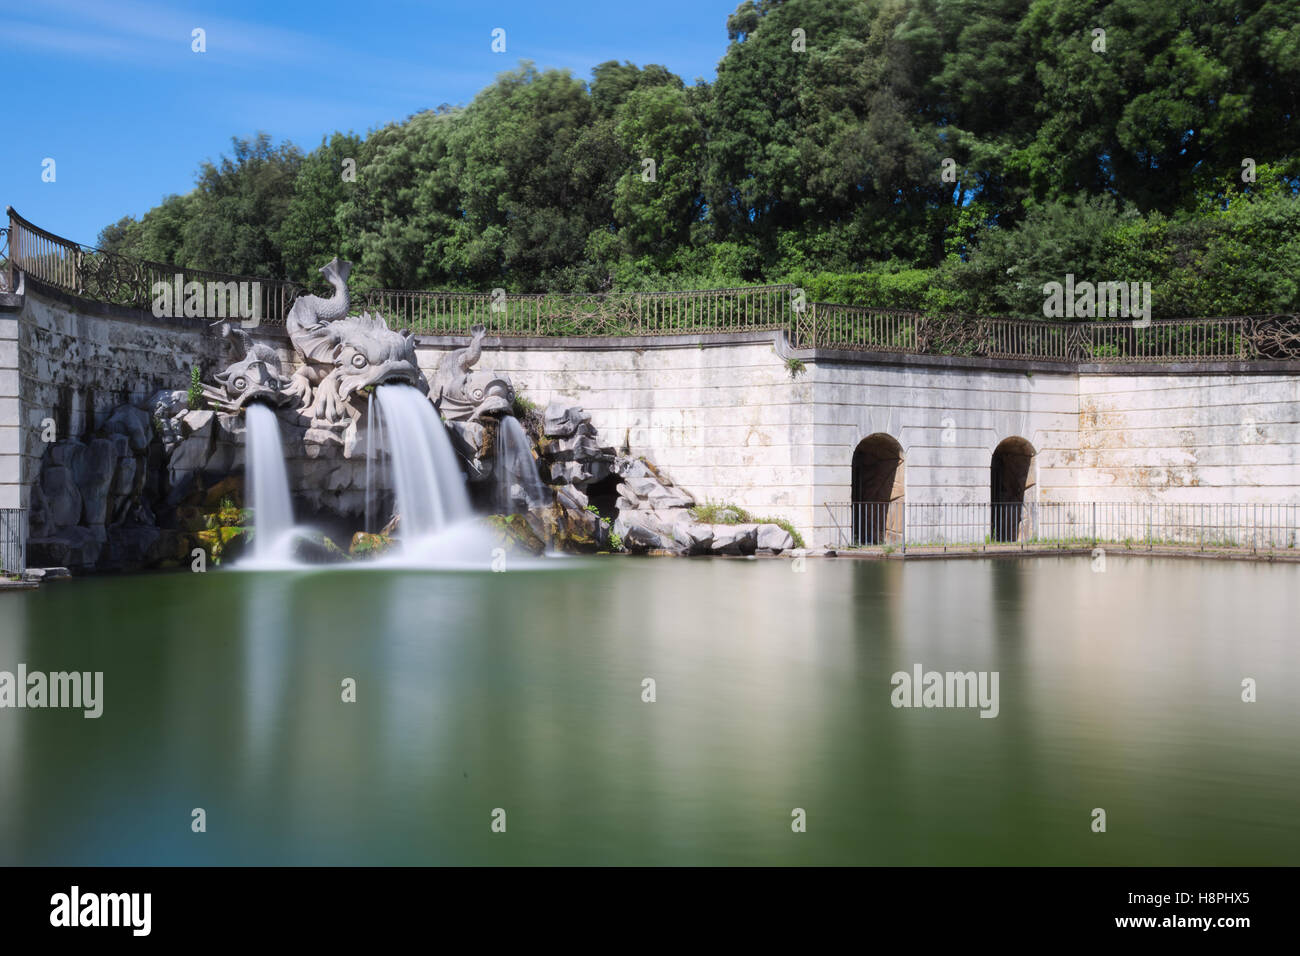 Fountain of the Dolphins. Royal Palace of Caserta (the park) Stock Photo